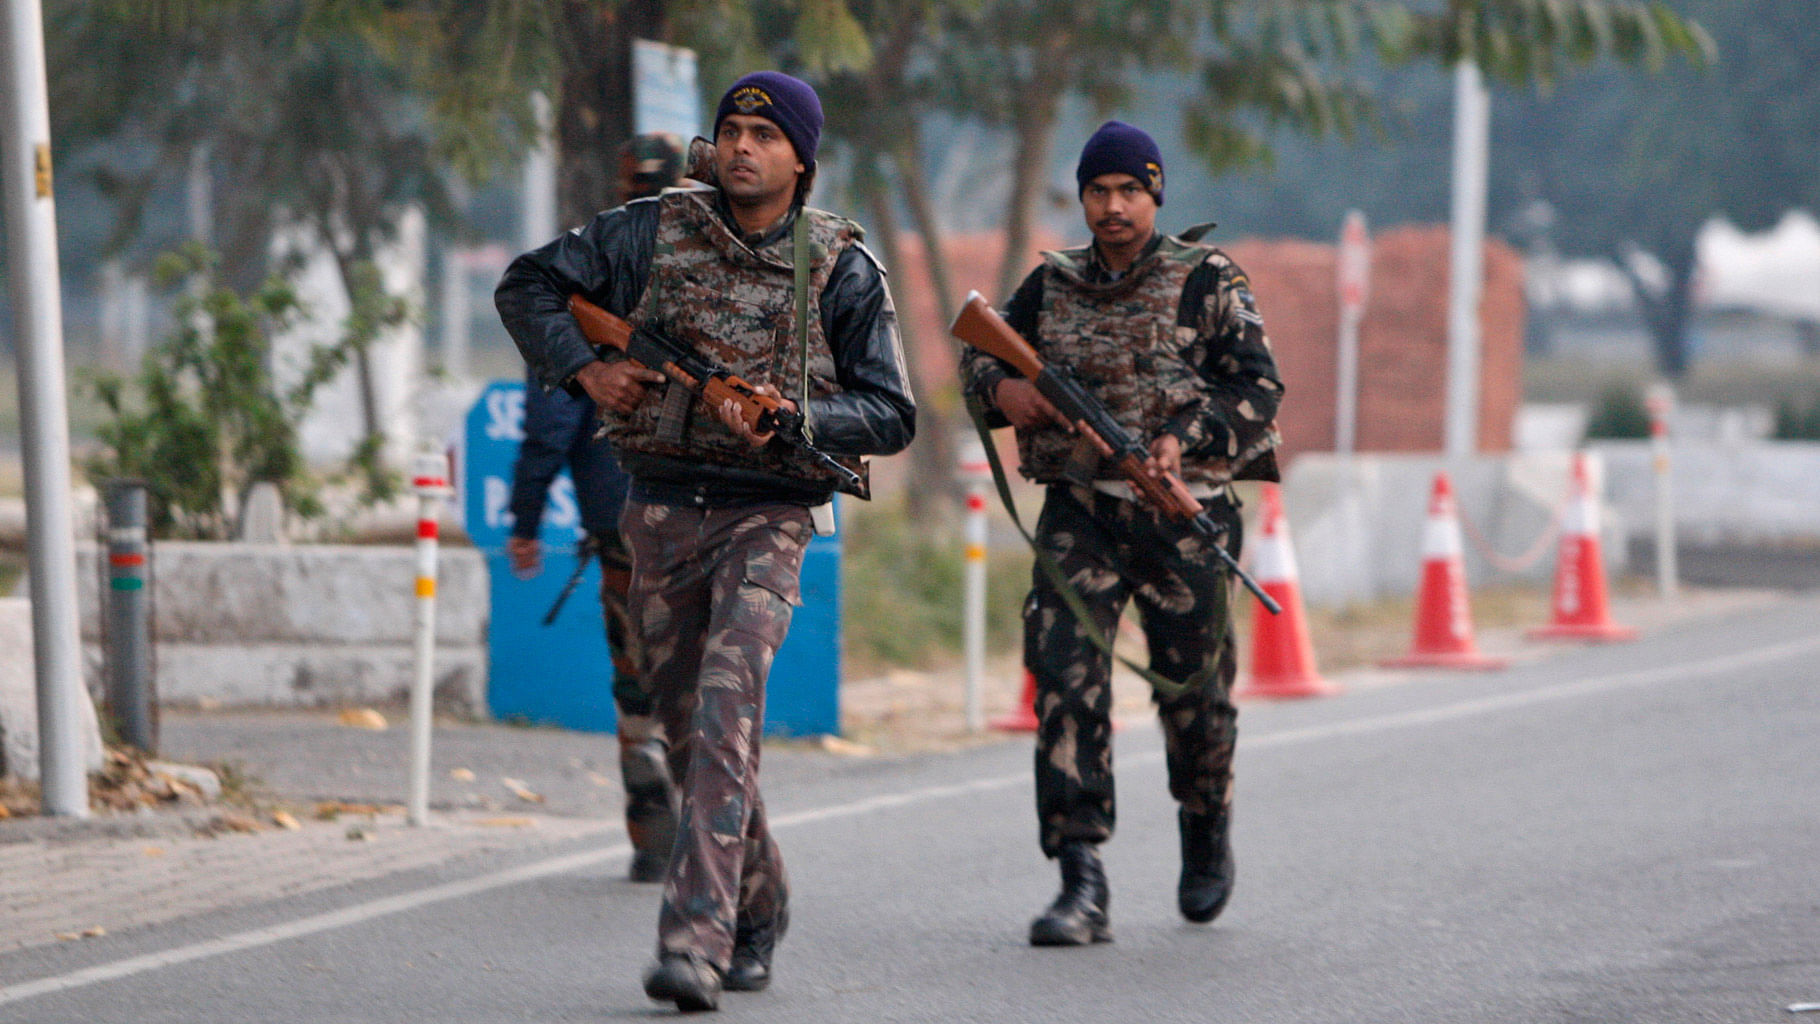 Indian security forces patrol inside the Indian air force base in Pathankot, India, Sunday, 3 January 2016. (Photo: AP)